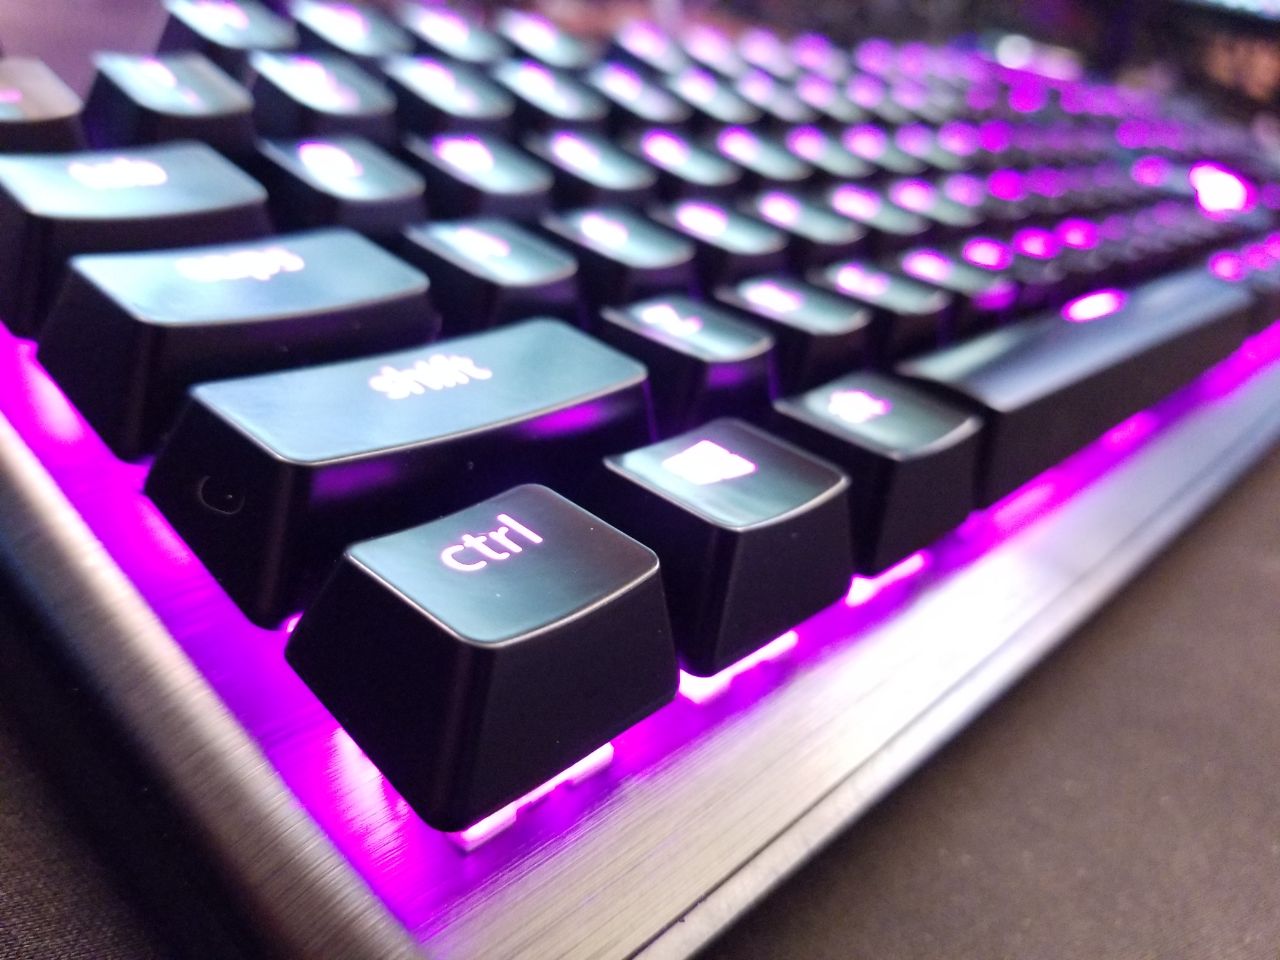 Whirlwind FX Element Keyboard Review